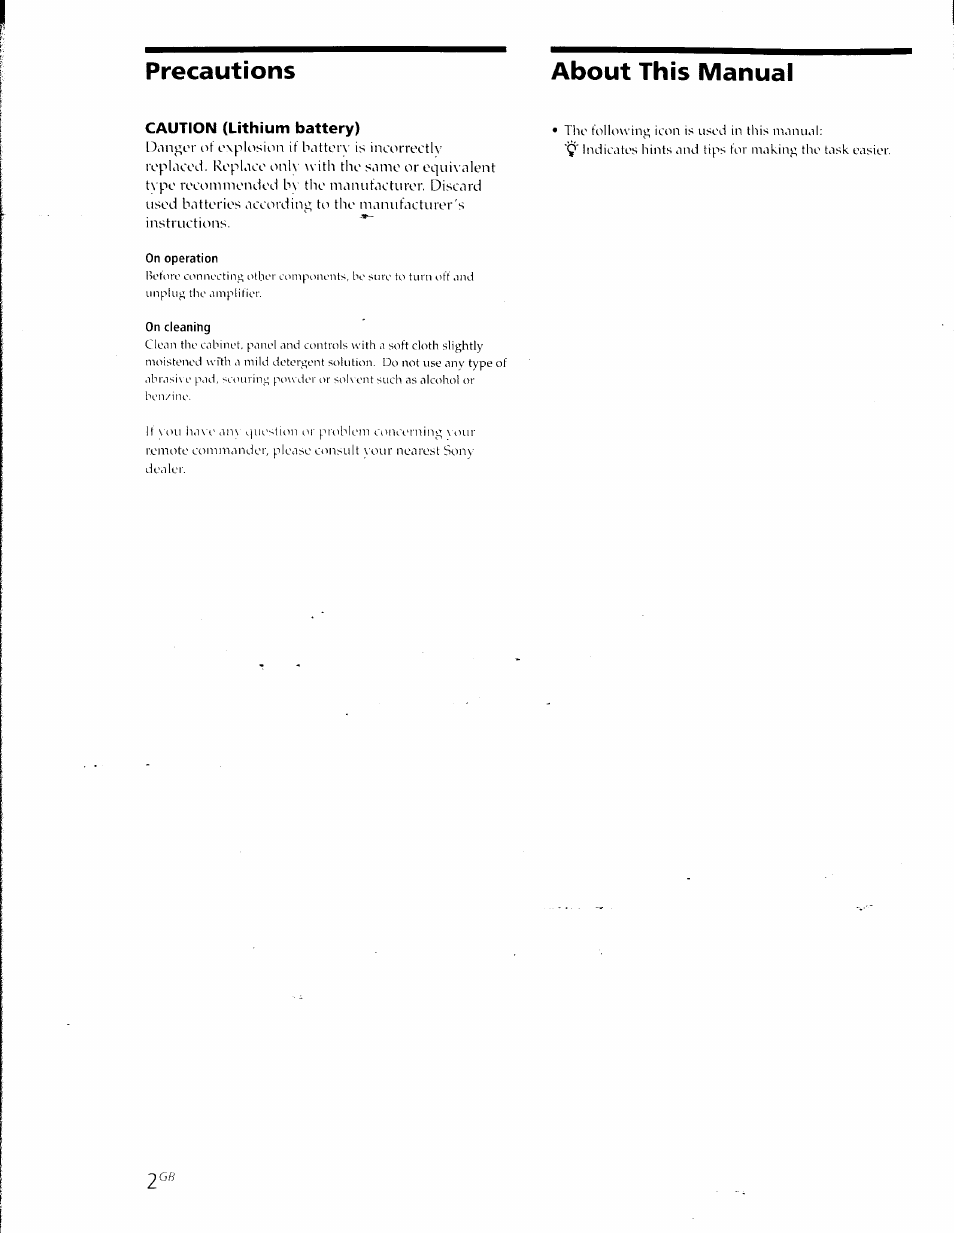 Caution (lithium battery), On operation, On cleaning | Precautions about this manual | Sony RM-TP501E Manuel d'utilisation | Page 2 / 49